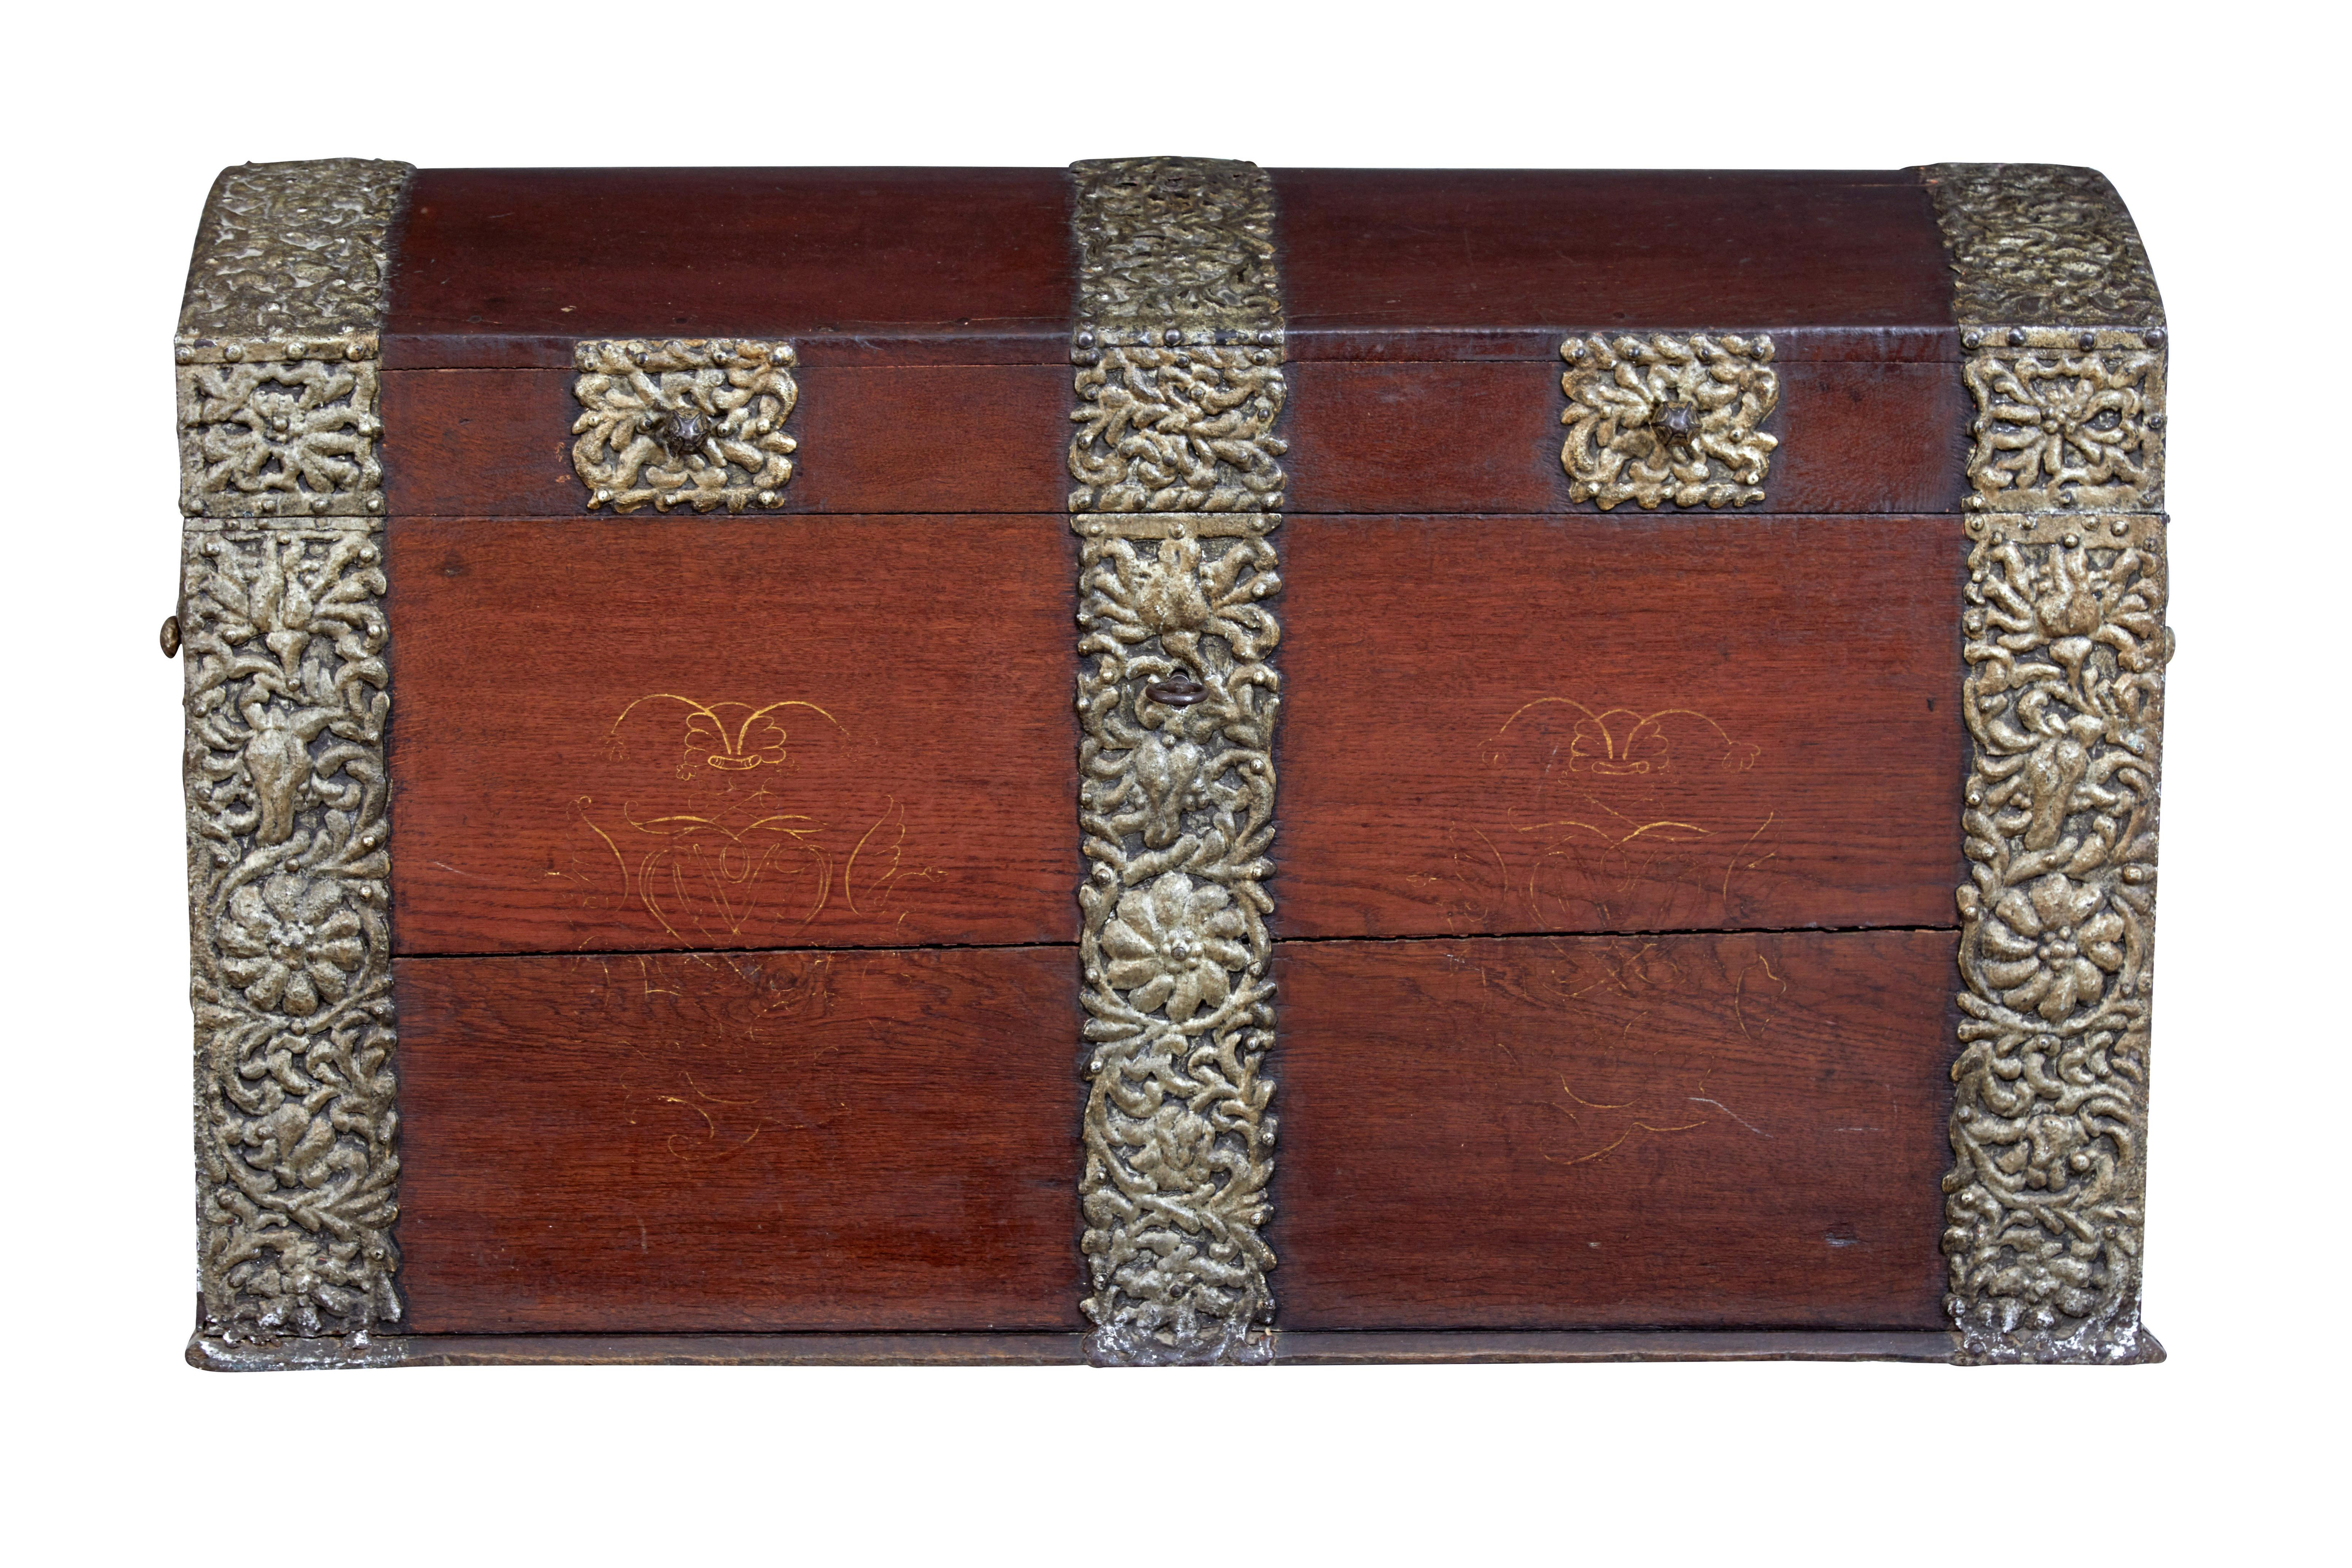 18th century danish oak dome top coffer circa 1790.

Beautiful dome top coffer made from solid oak, and decorated with ornate strap work.  Lid opens to reveal a partially fitted interior consisting on a candle box.

Strap work on both ends and over